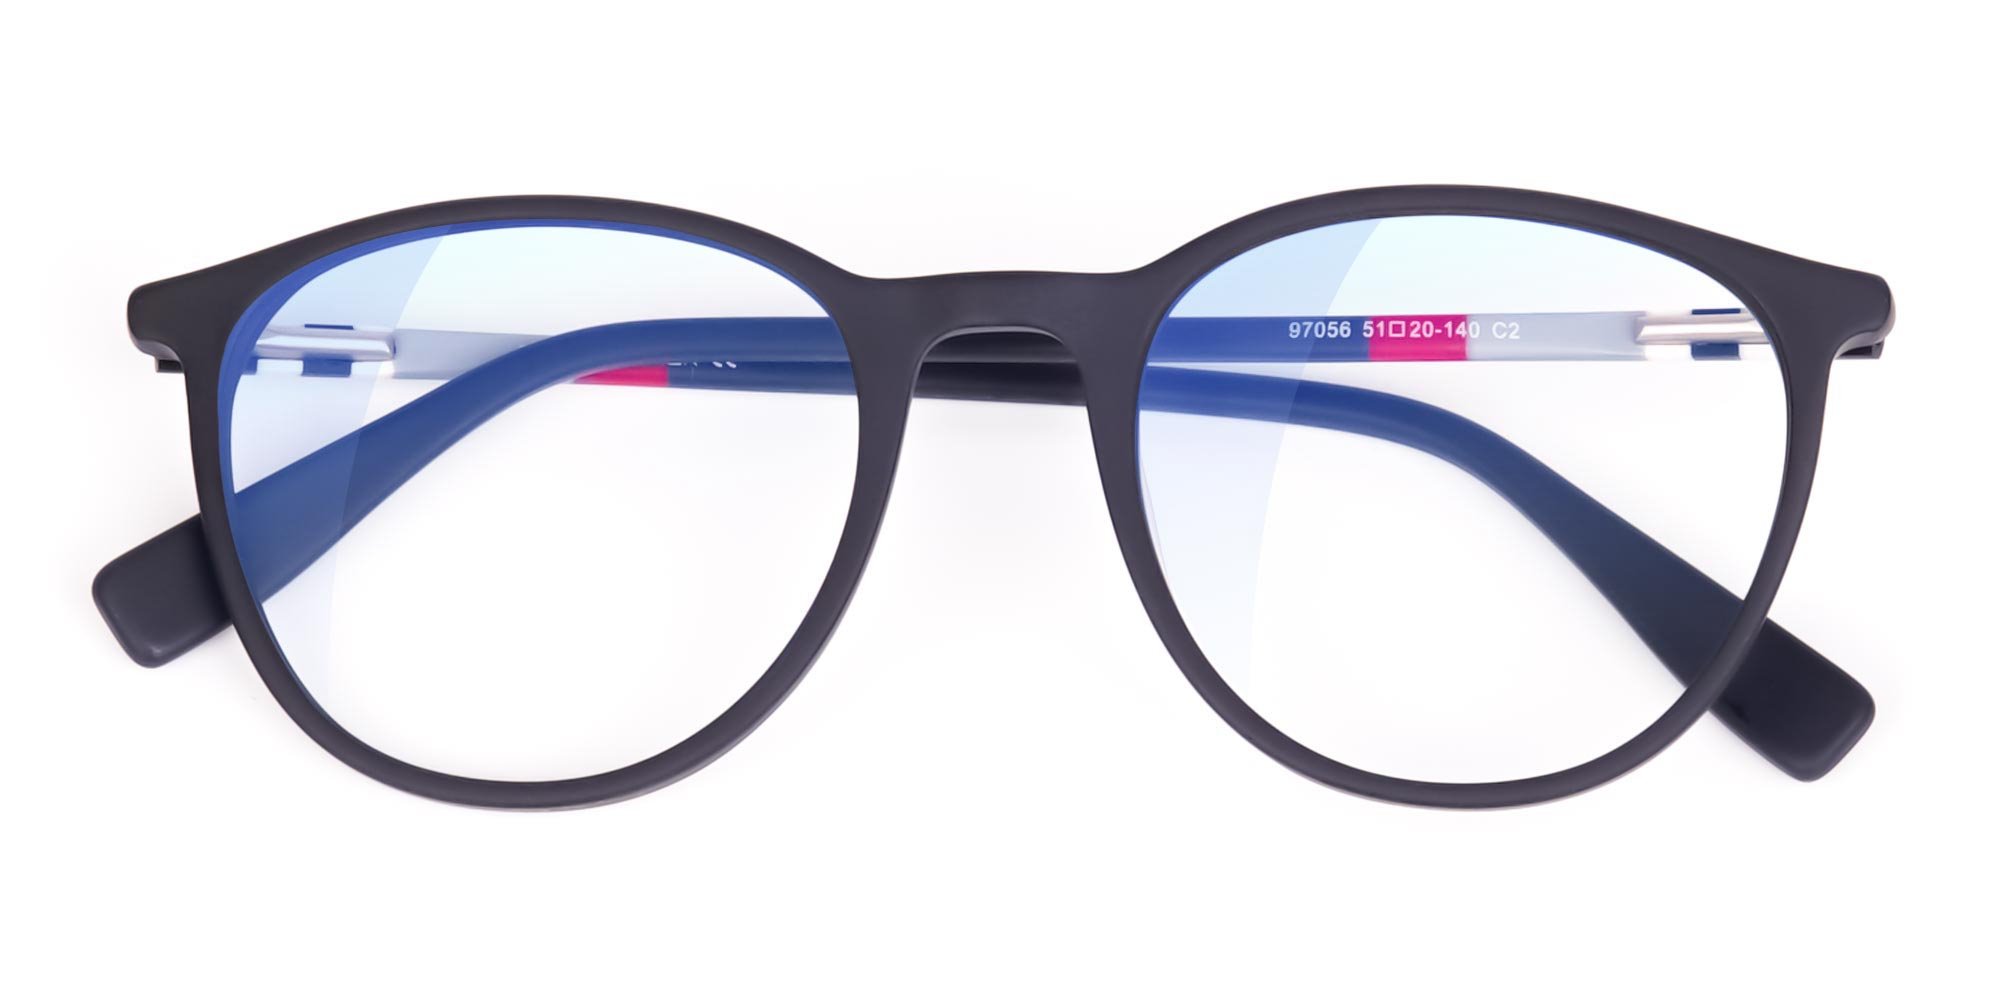 reading glasses with blue light filter